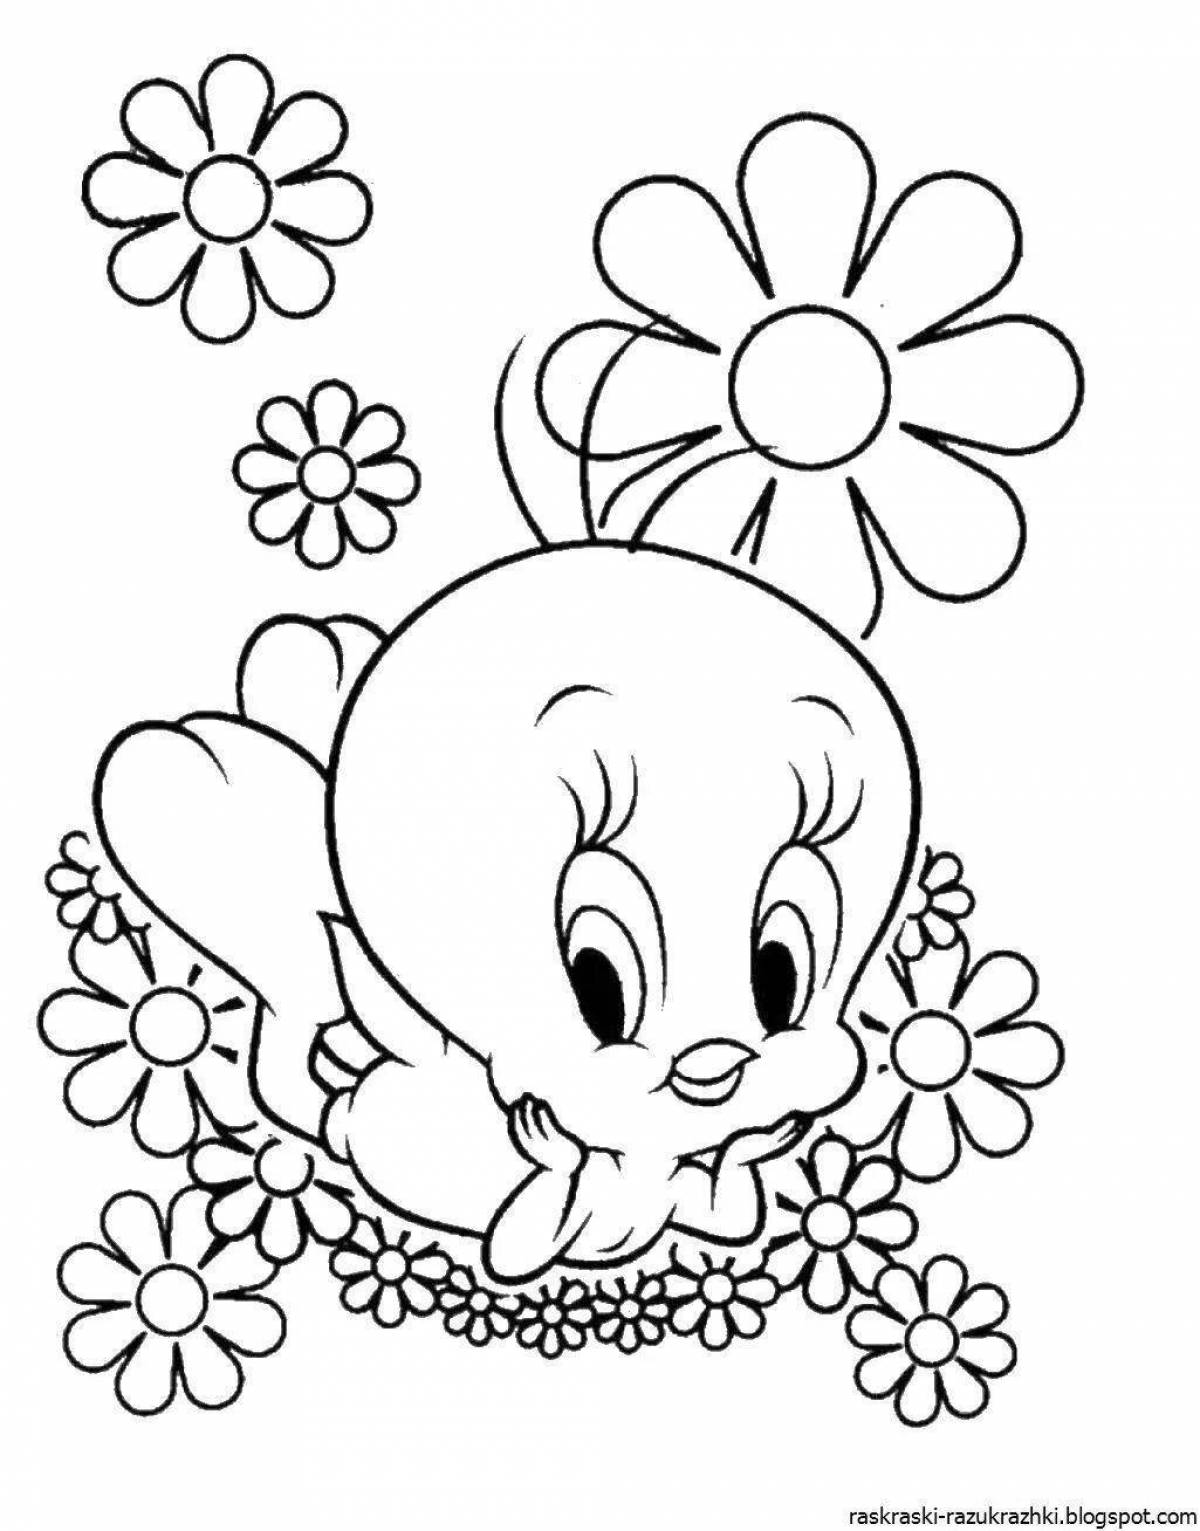 Great flowers coloring book for 7 year olds